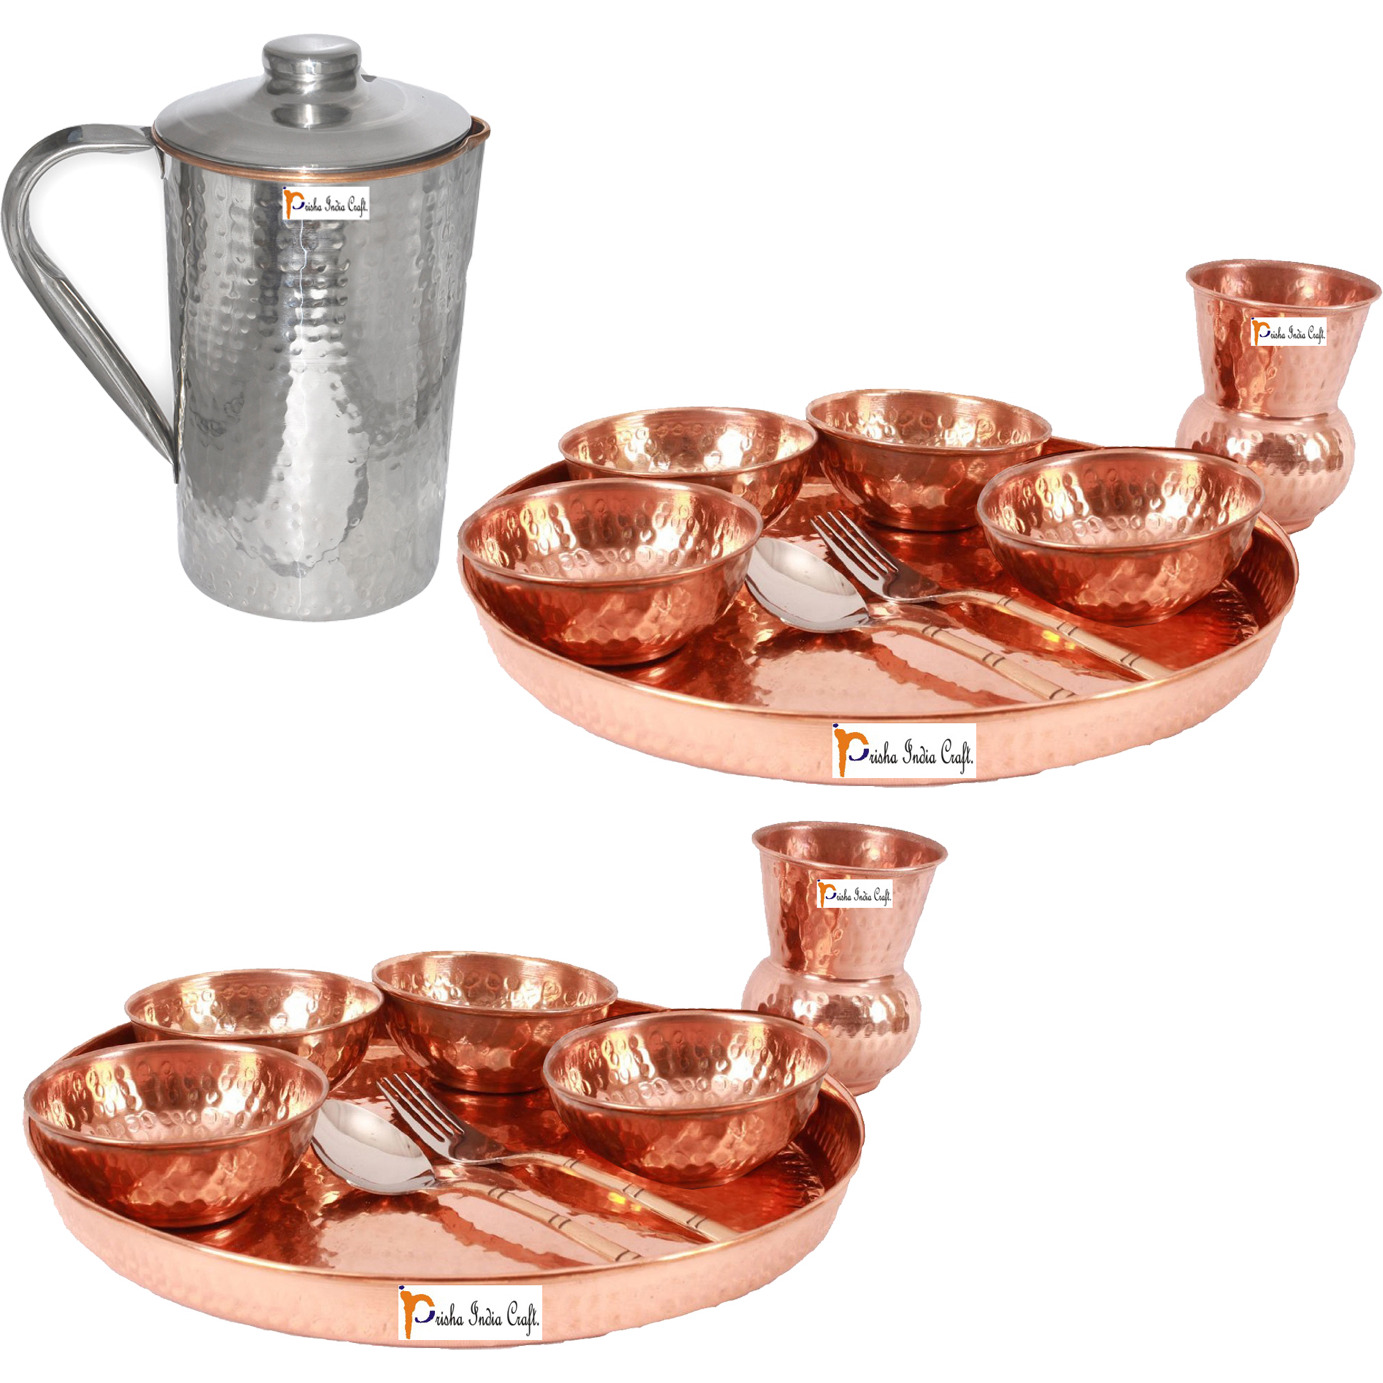 Prisha India Craft B. Set of 2 Dinnerware Traditional 100% Pure Copper Dinner Set of Thali Plate, Bowls, Glass and Spoon, Dia 12  With 1 Stainless Steel Copper Hammered Pitcher Jug - Christmas Gift